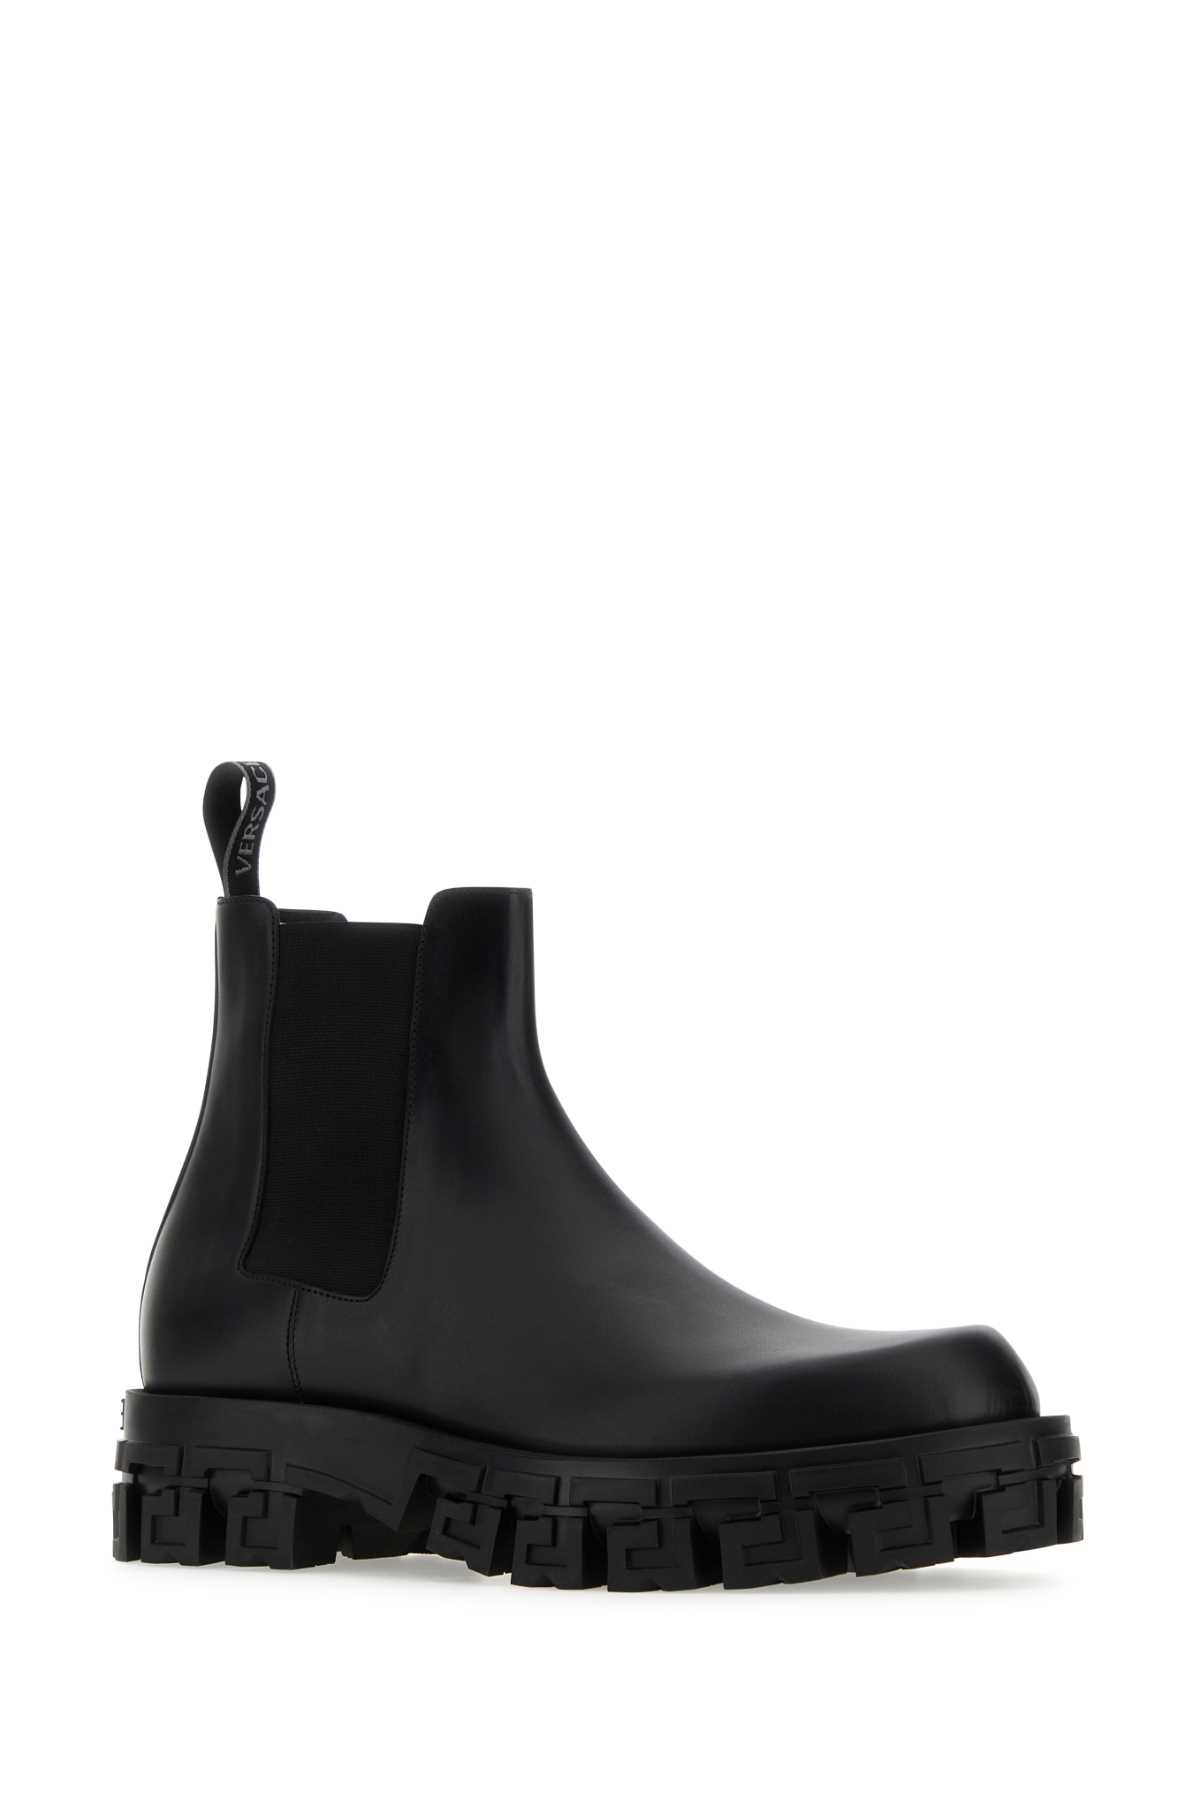 VERSACE BLACK LEATHER GRECA PORTICO ANKLE BOOTS